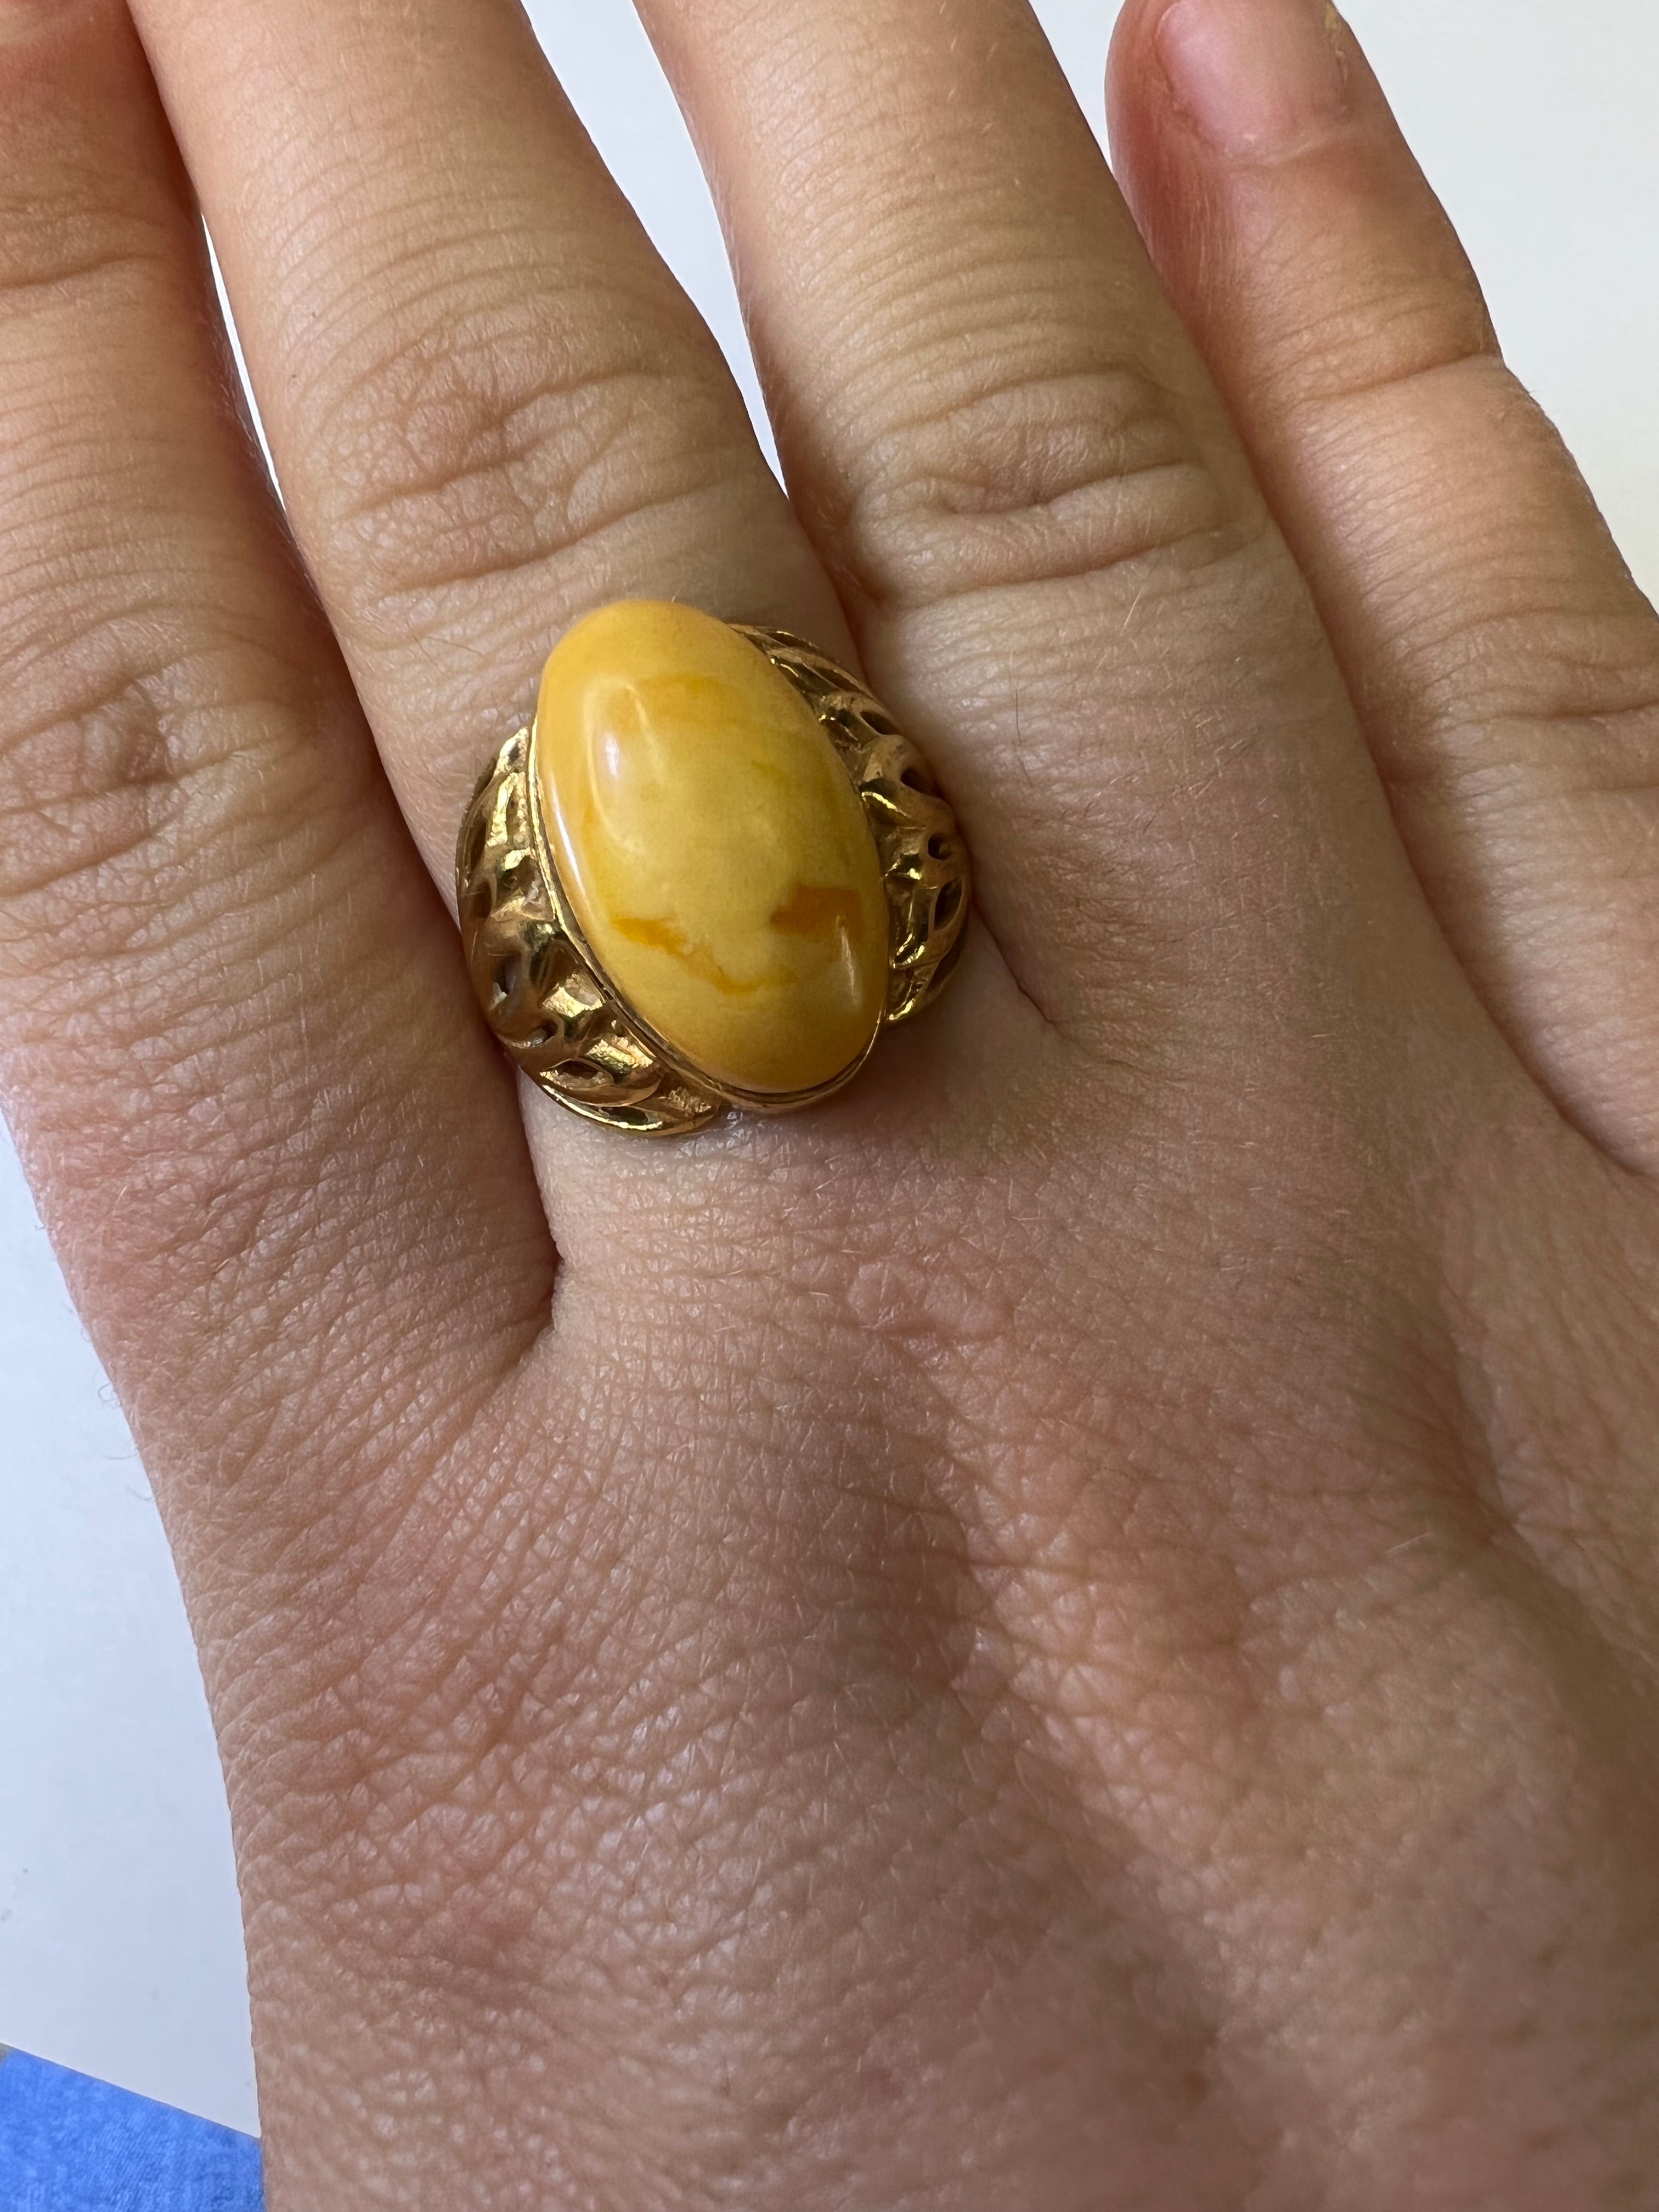 Art Nouveau 23K Yellow Gold Oval Amber Engraved Ring Band Size 9